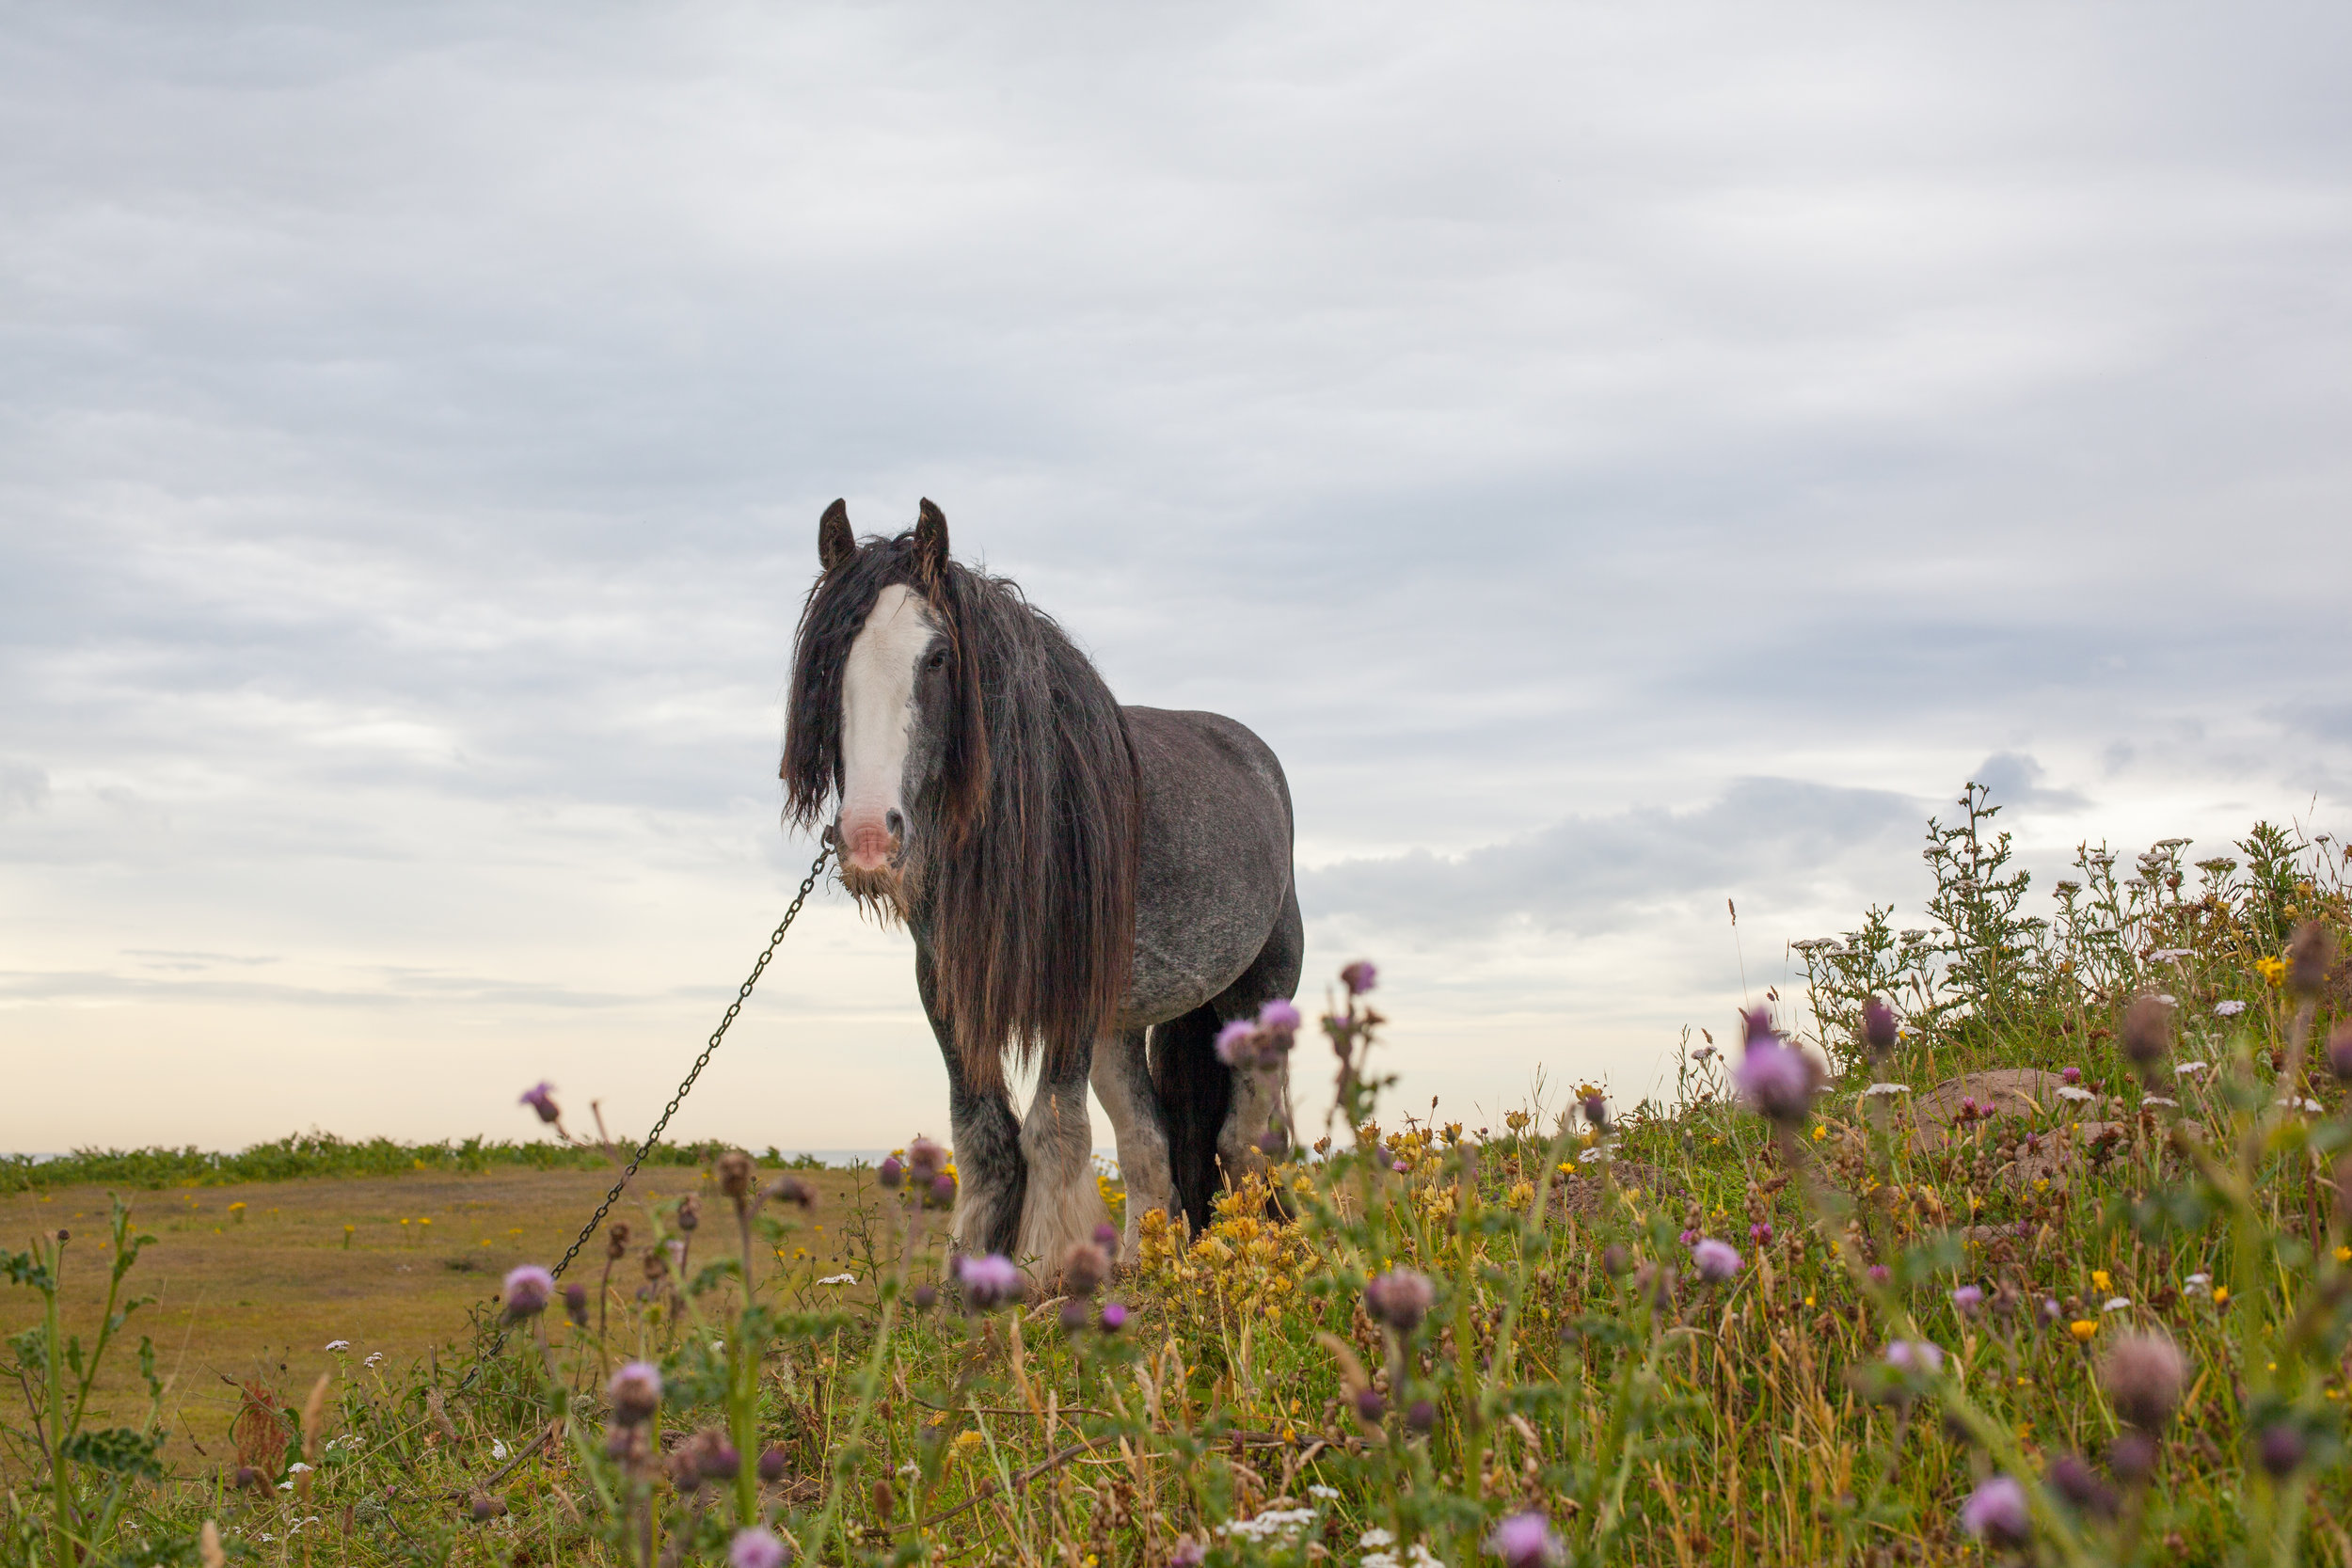 A gypsy horse tethered in a field.